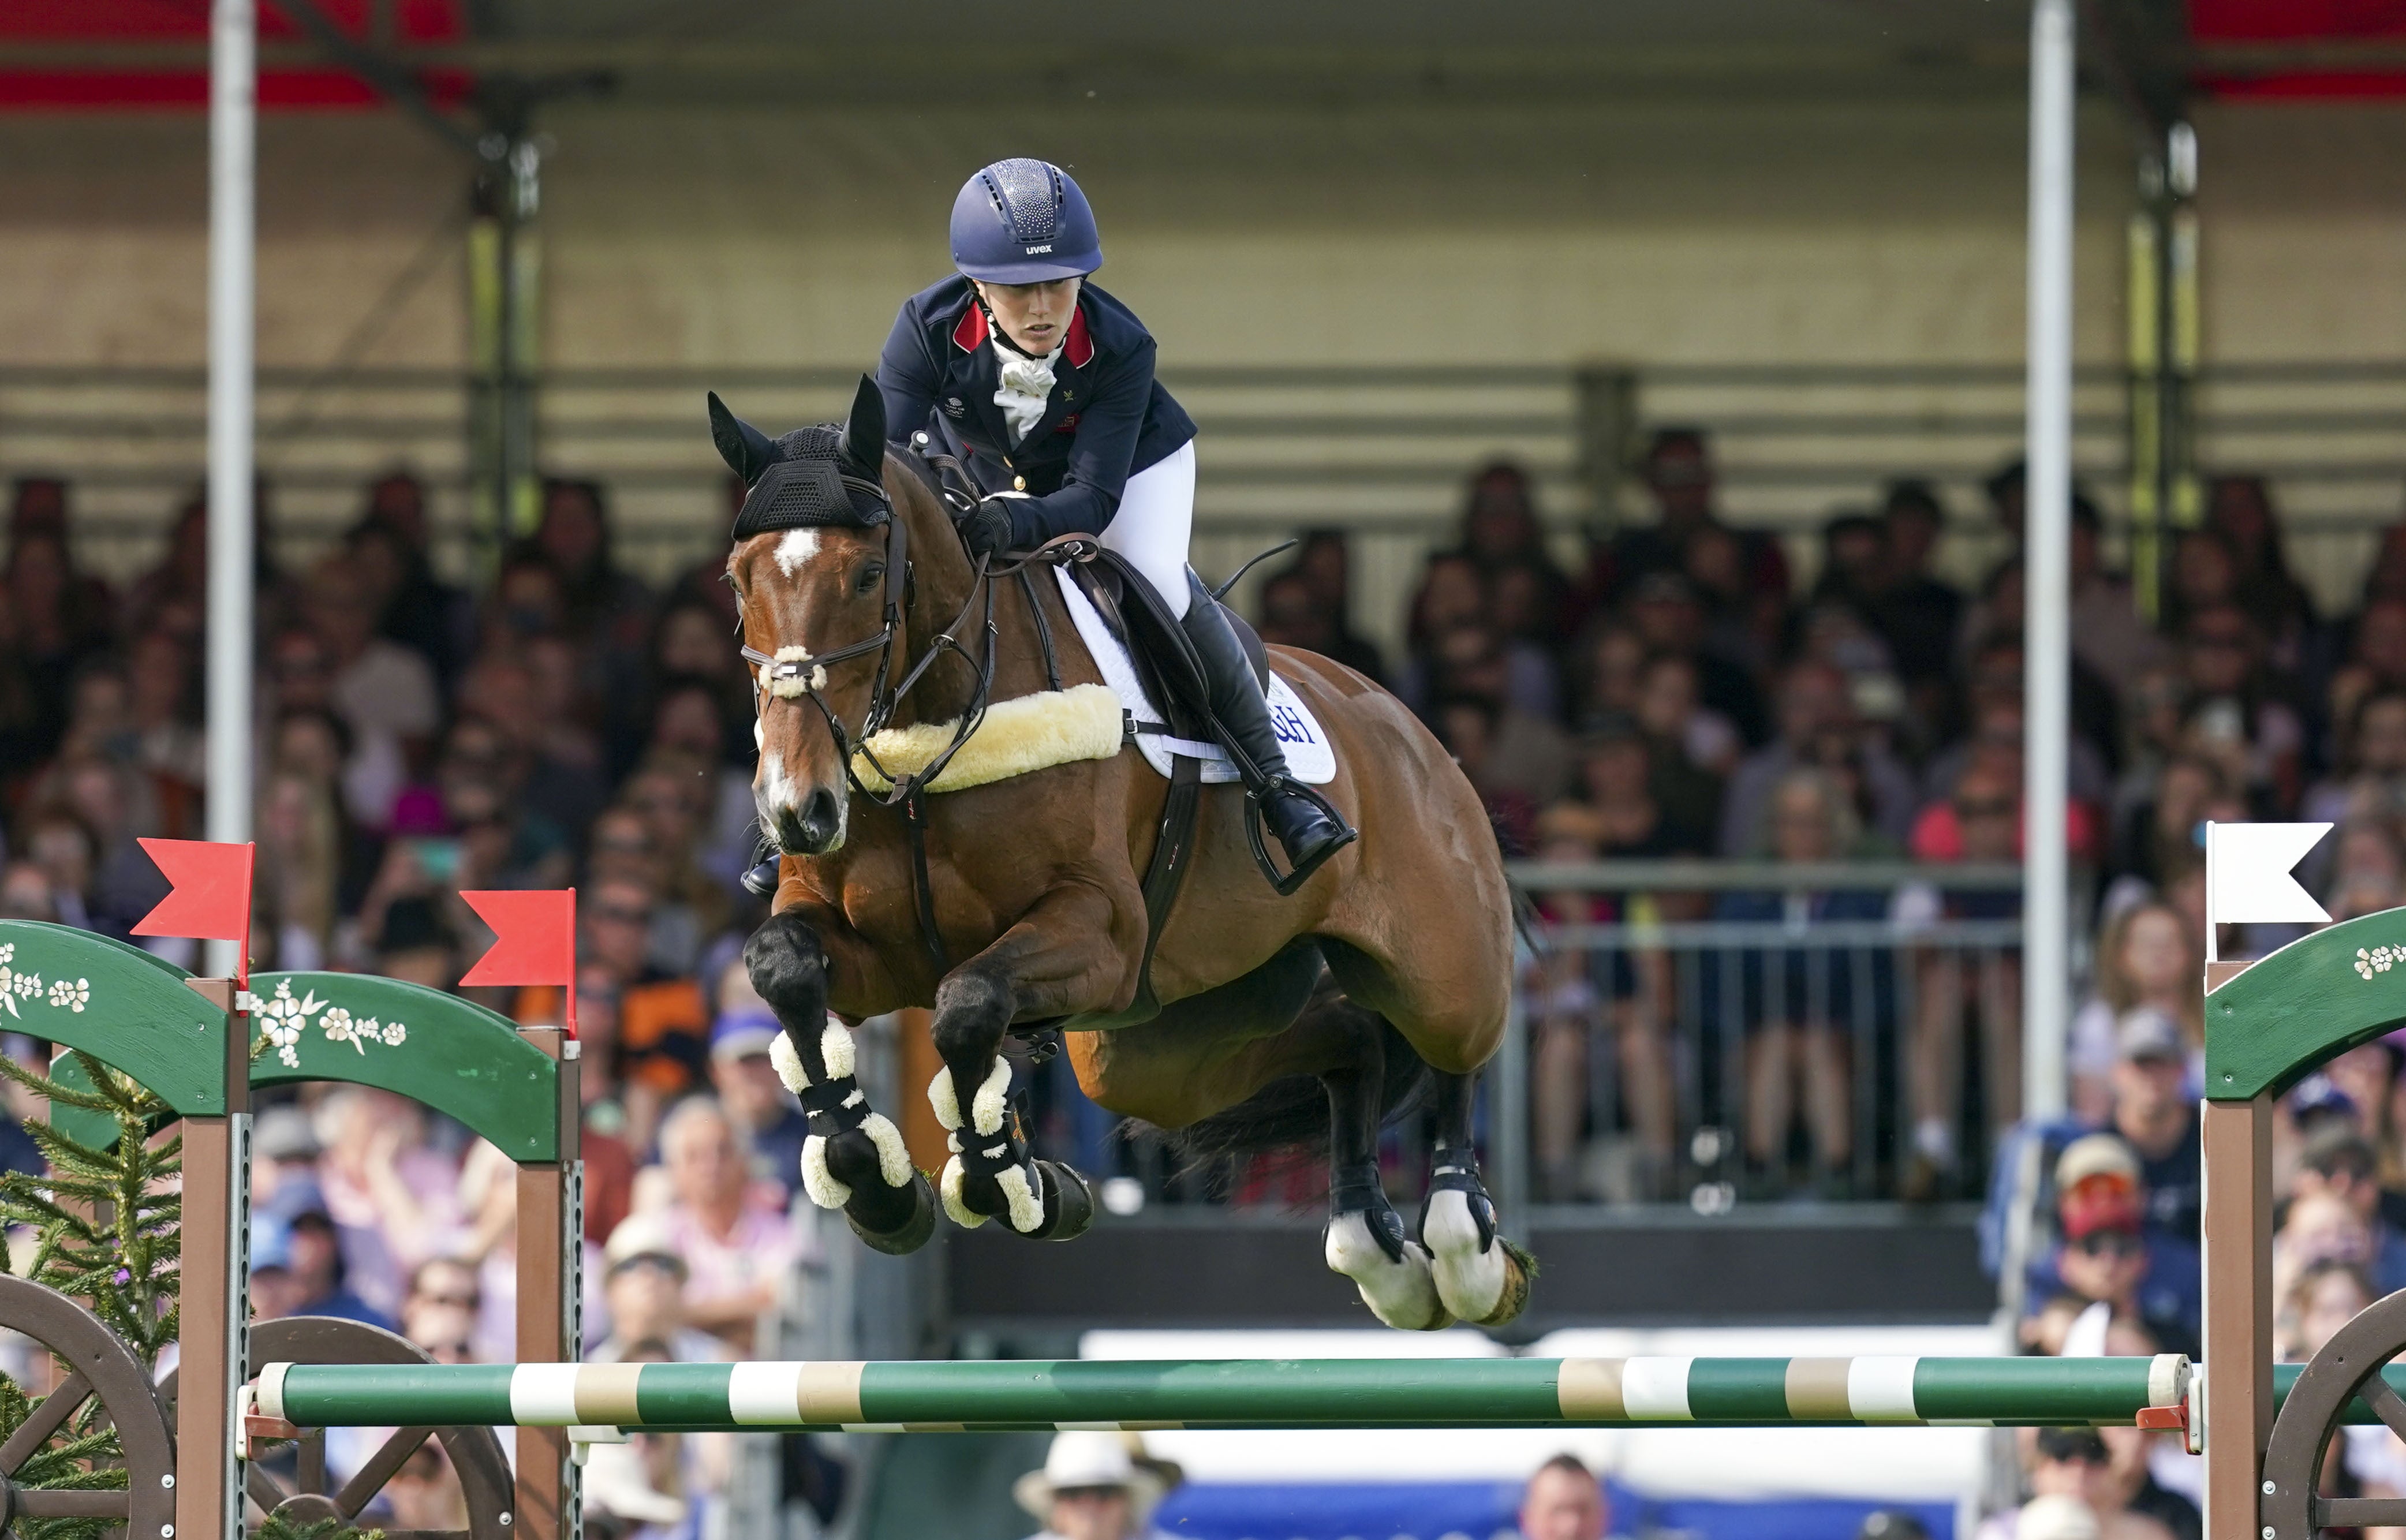 Laura Collett and London 52 in showjumping action at Badminton Horse Trials (Steve Parsons/PA)